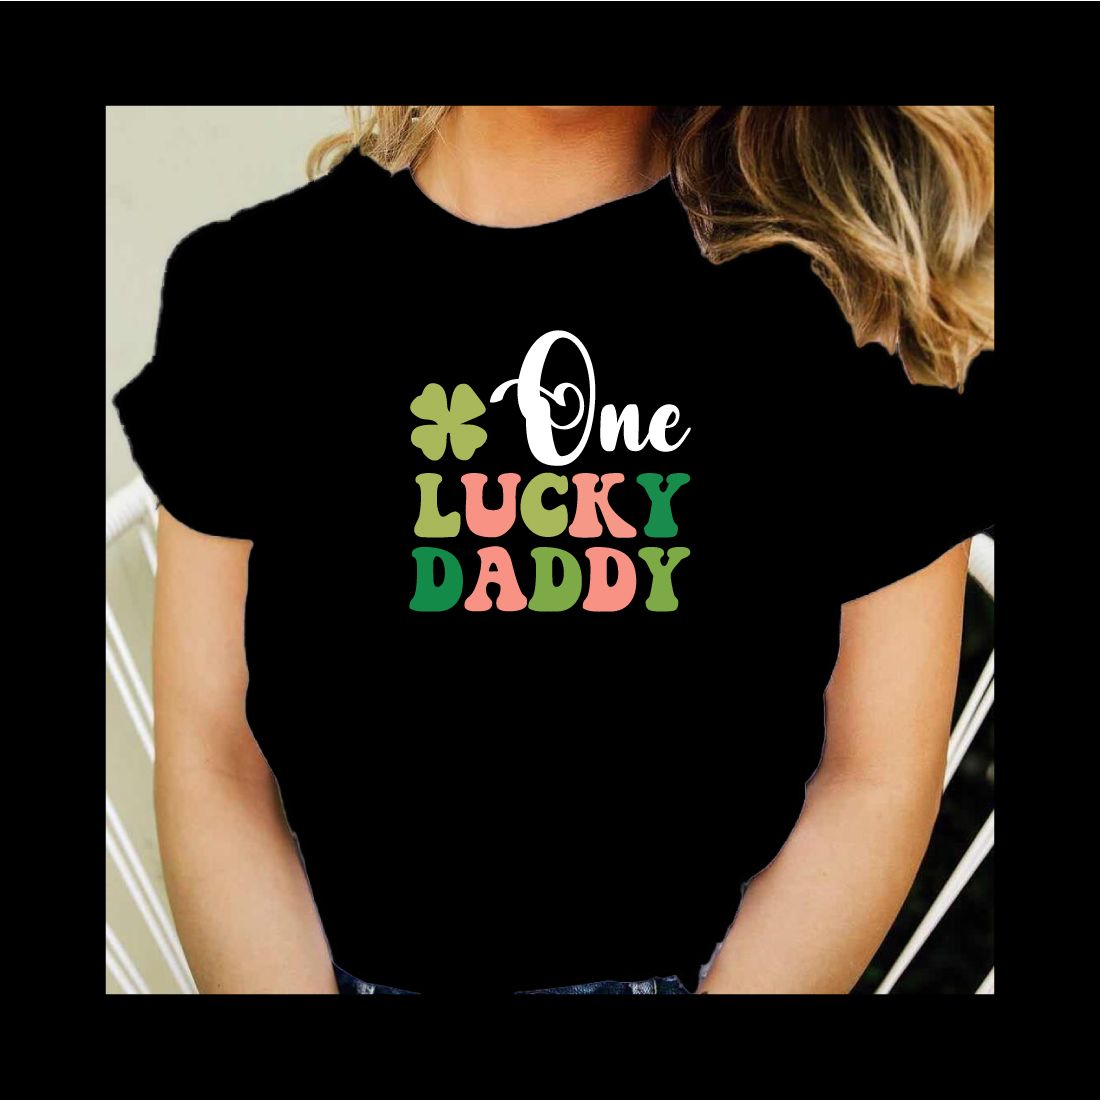 Woman wearing a black shirt that says one lucky daddy.